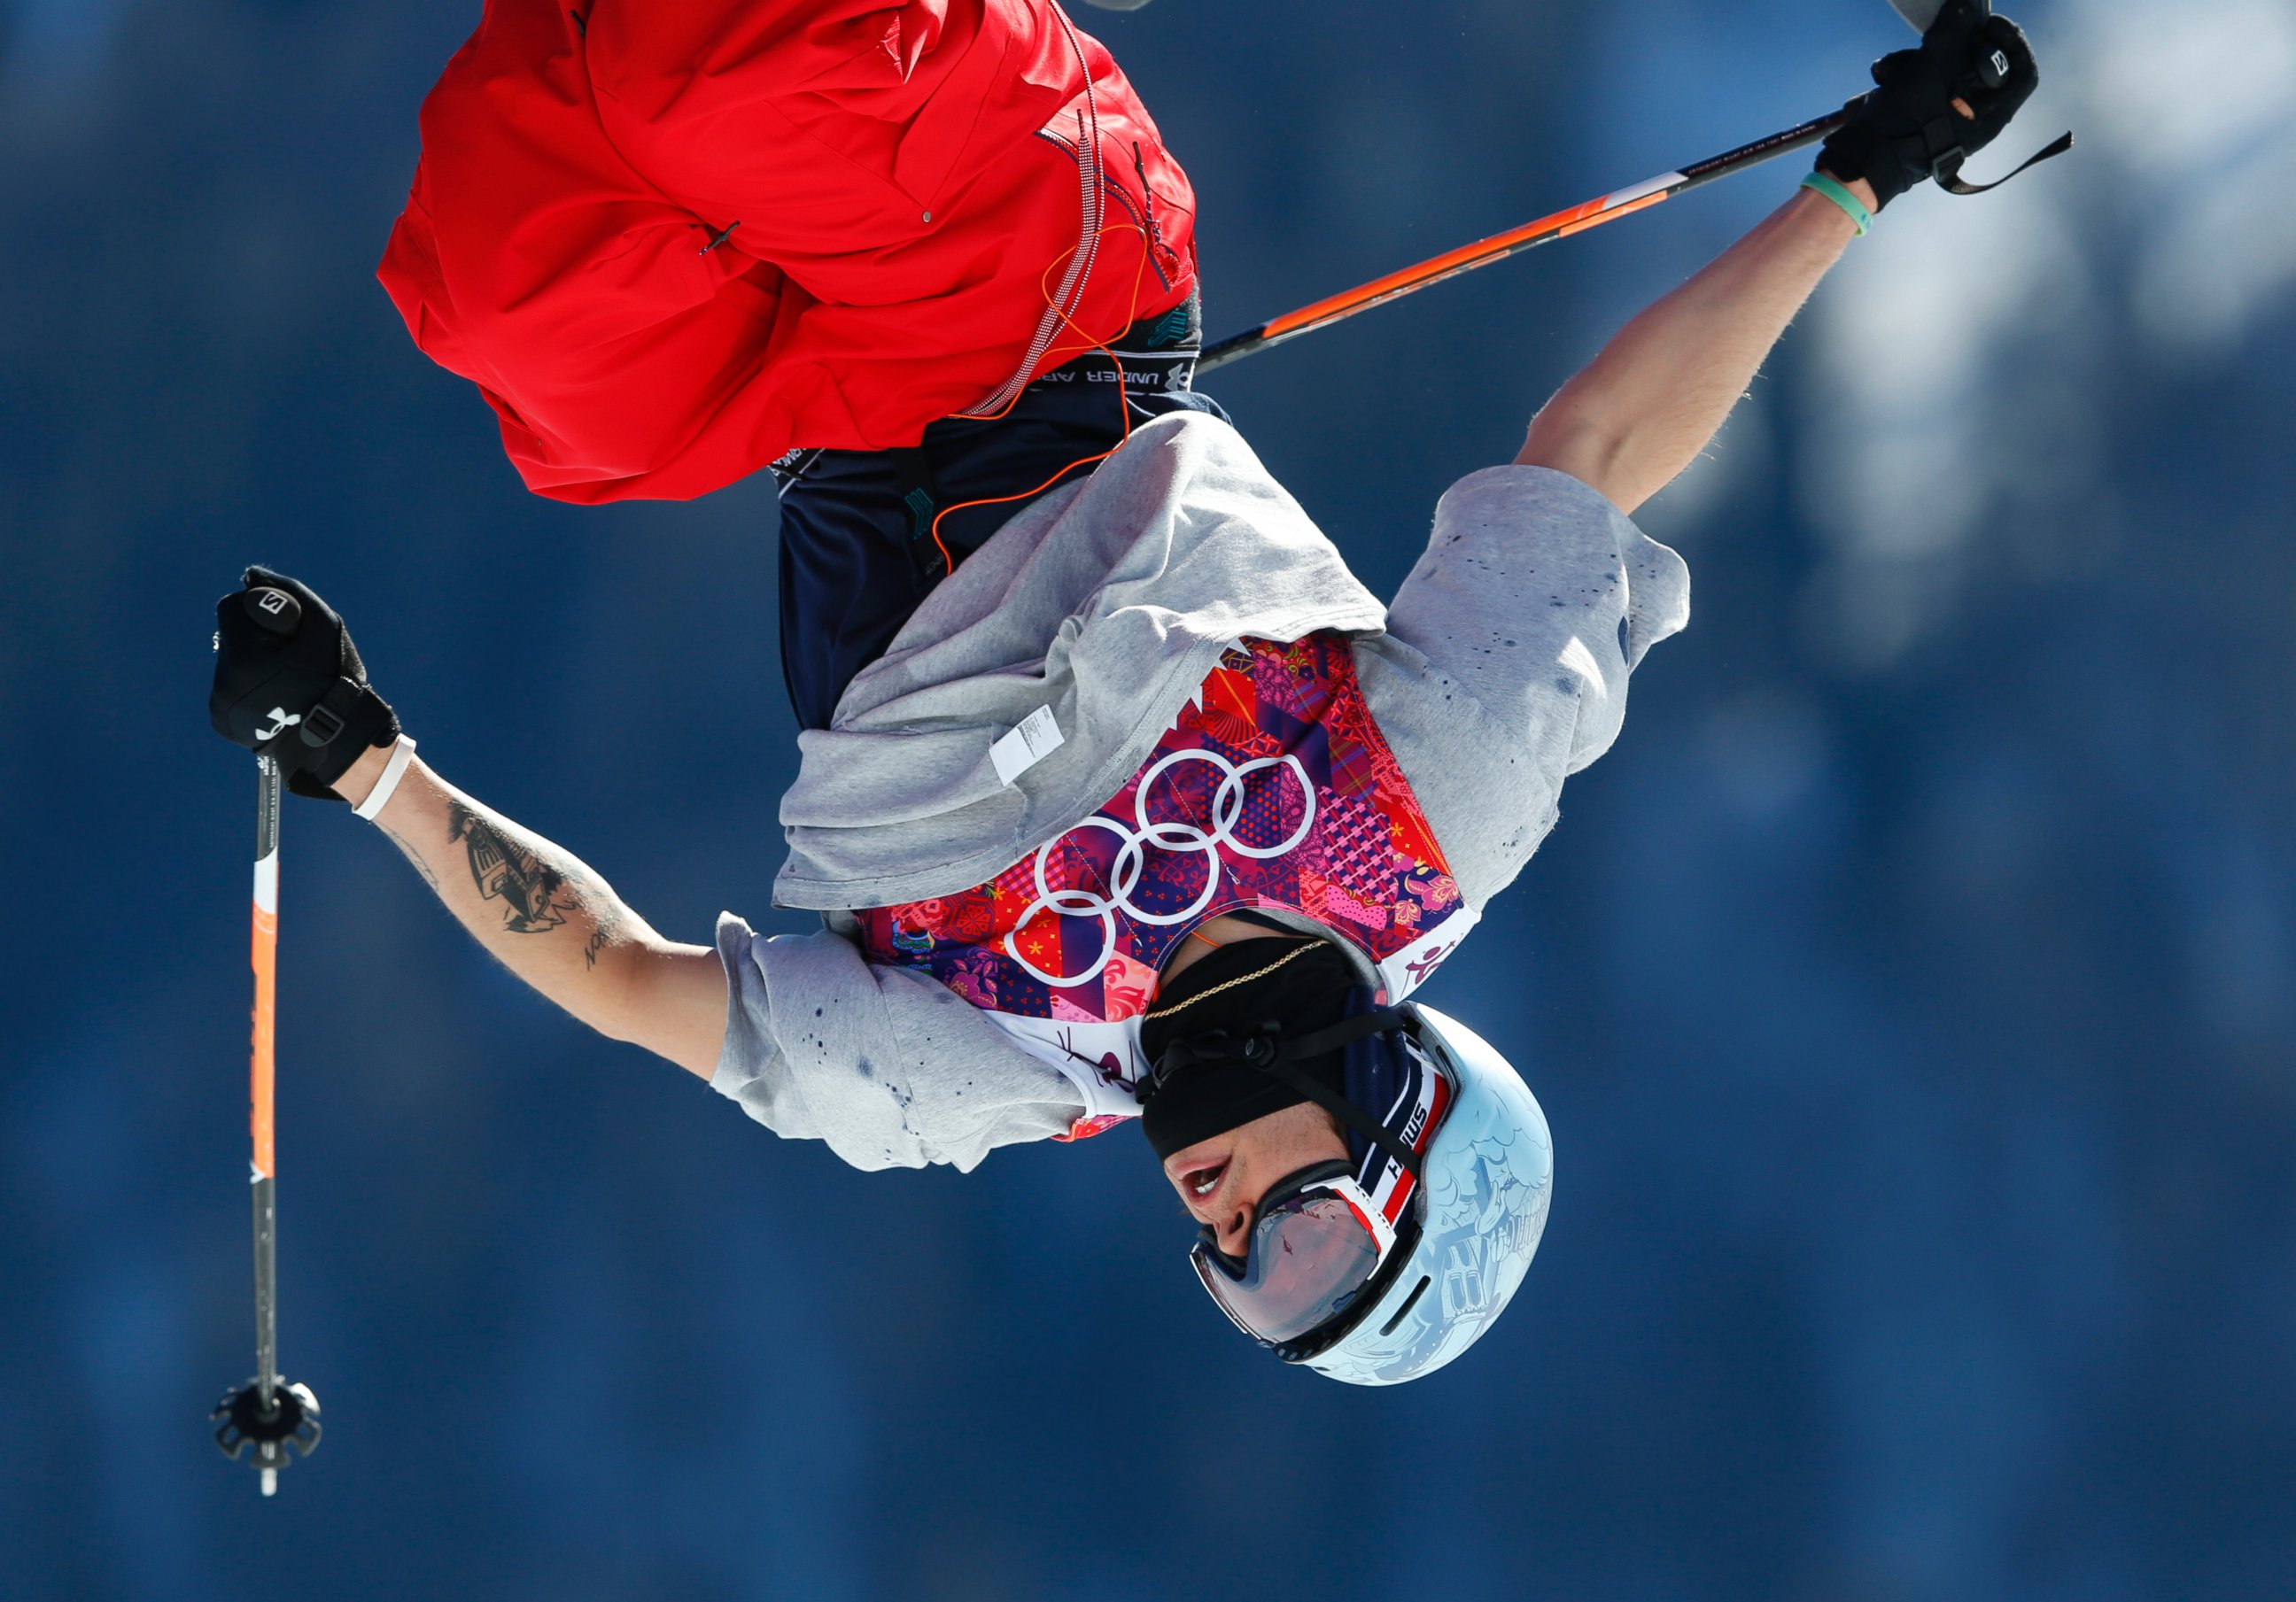 PHOTO: Bobby Brown of the United States jumps during a run in the men's ski slopestyle final at the Rosa Khutor Extreme Park, at the 2014 Winter Olympics, Feb. 13, 2014, in Krasnaya Polyana, Russia.